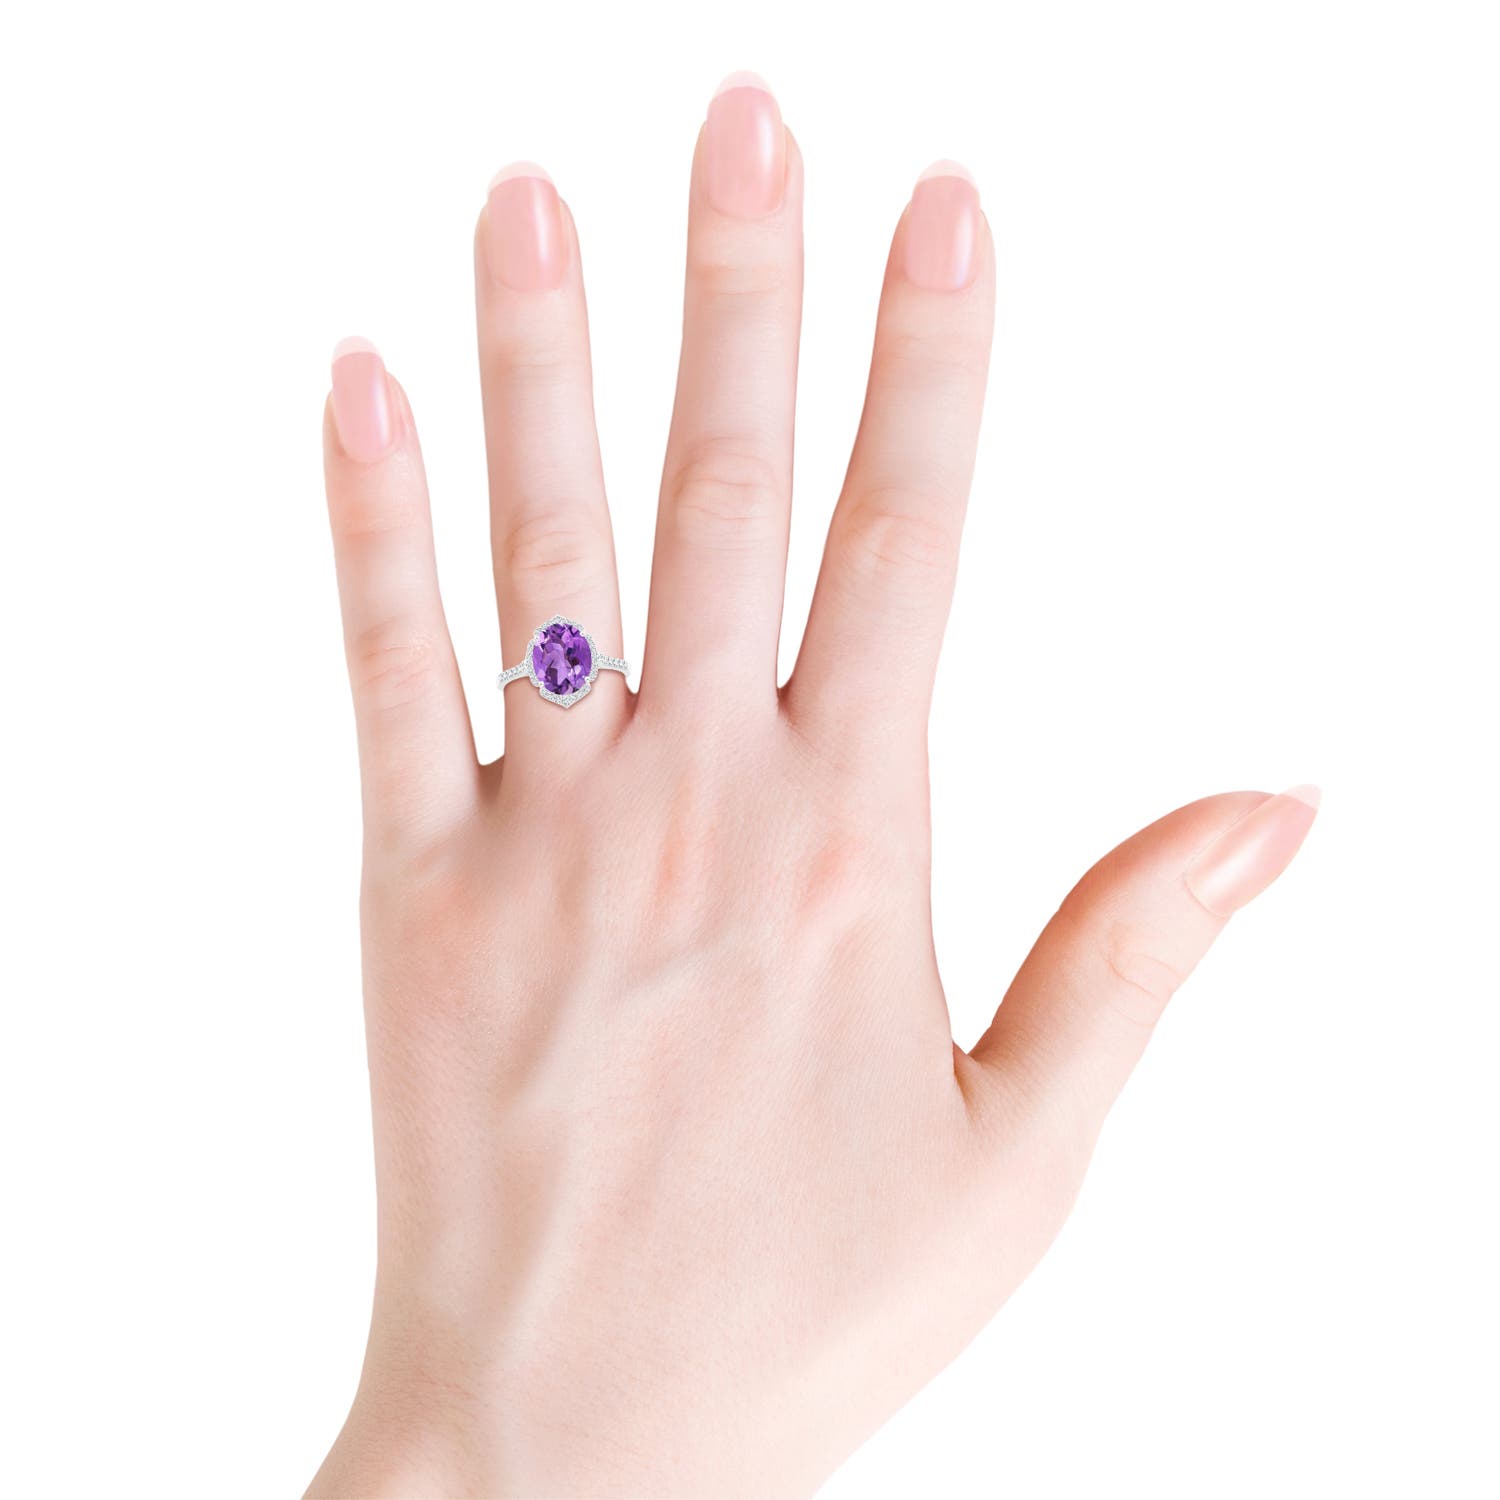 AA - Amethyst / 2.51 CT / 14 KT White Gold